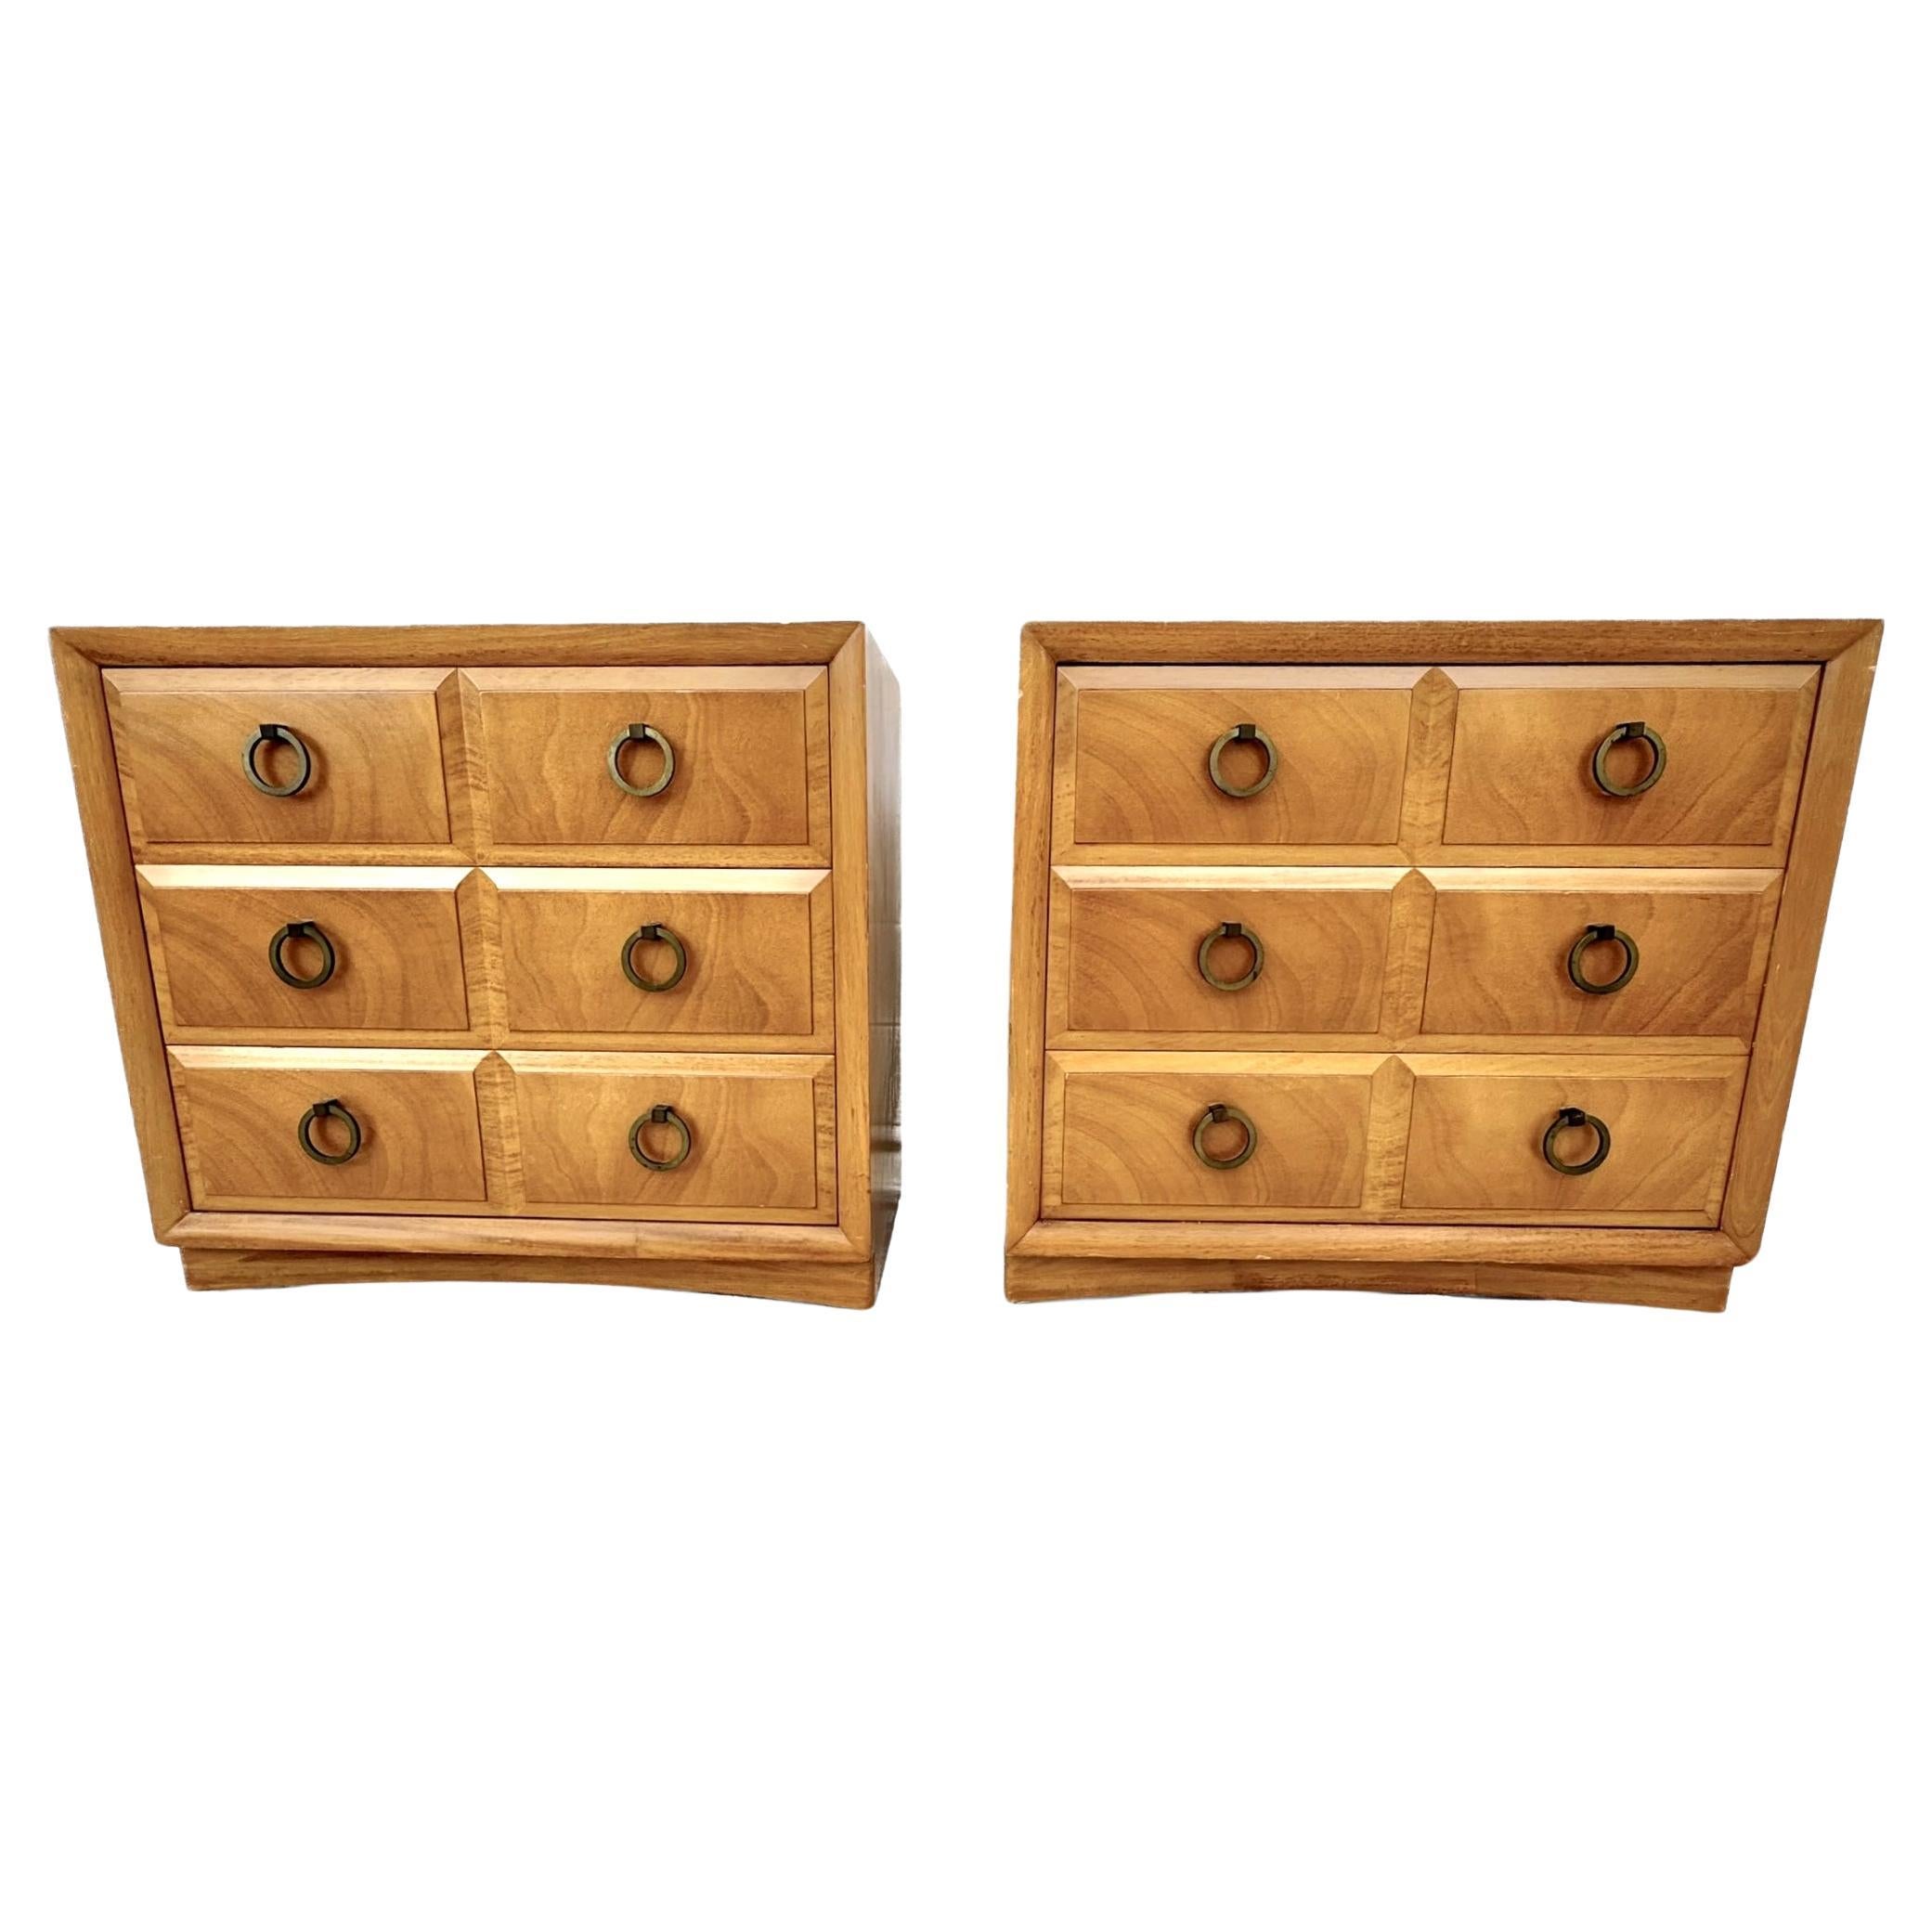 T.H. Robsjohn-Gibbings Widdicomb Pair of Bedside Tables / Chests For Sale